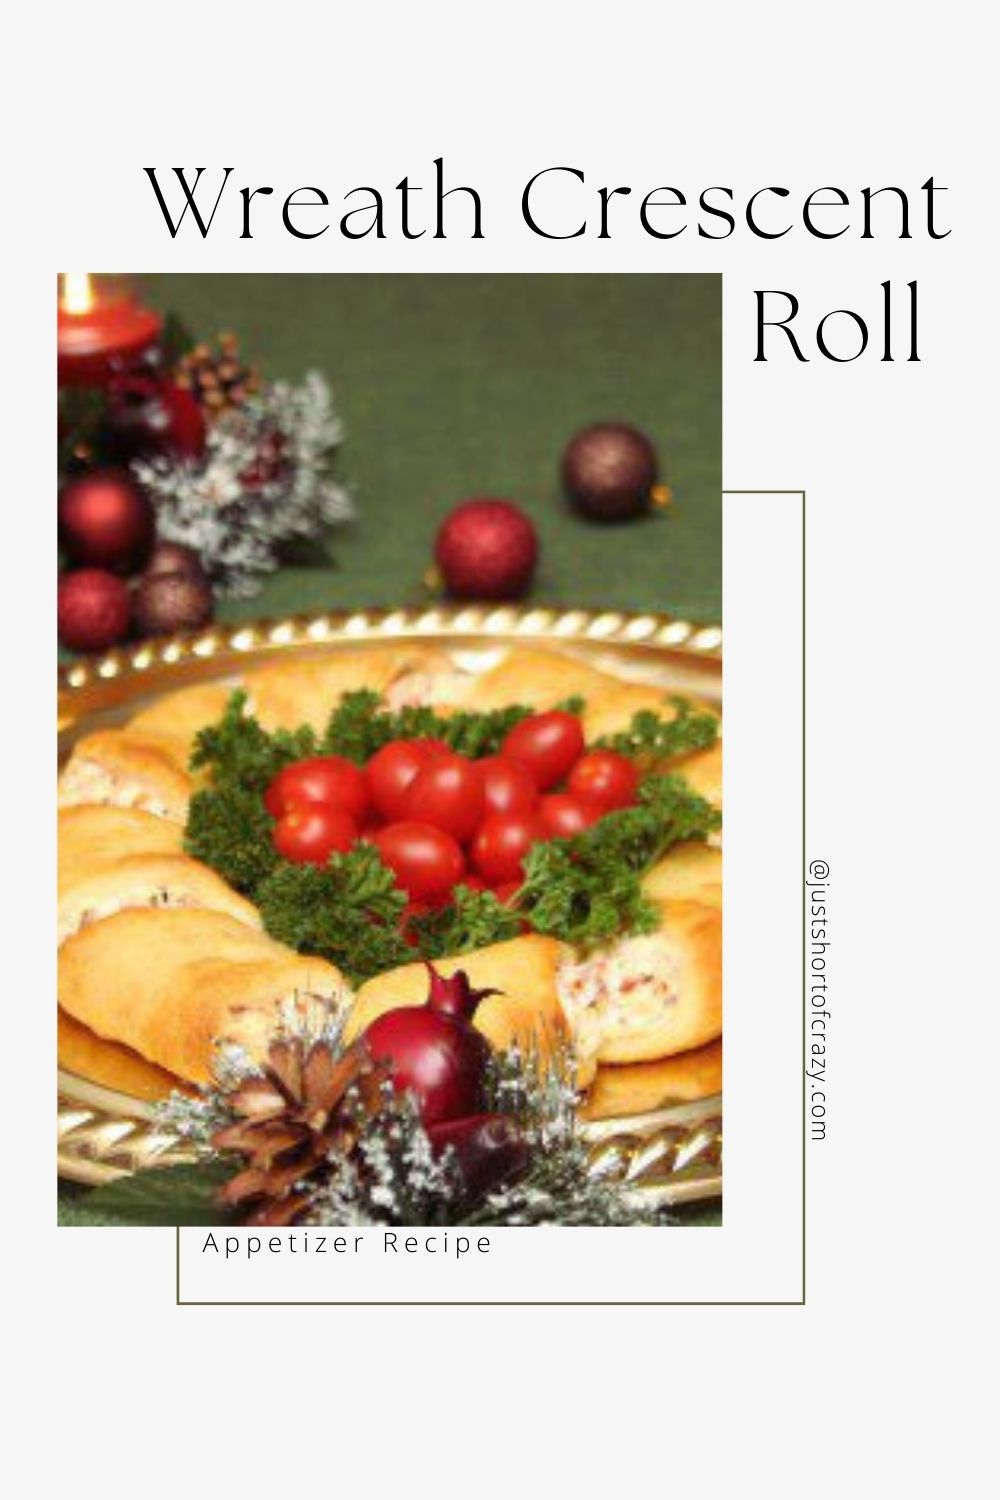 Pin for Christmas Wreath crescent rolls appetizer recipe.